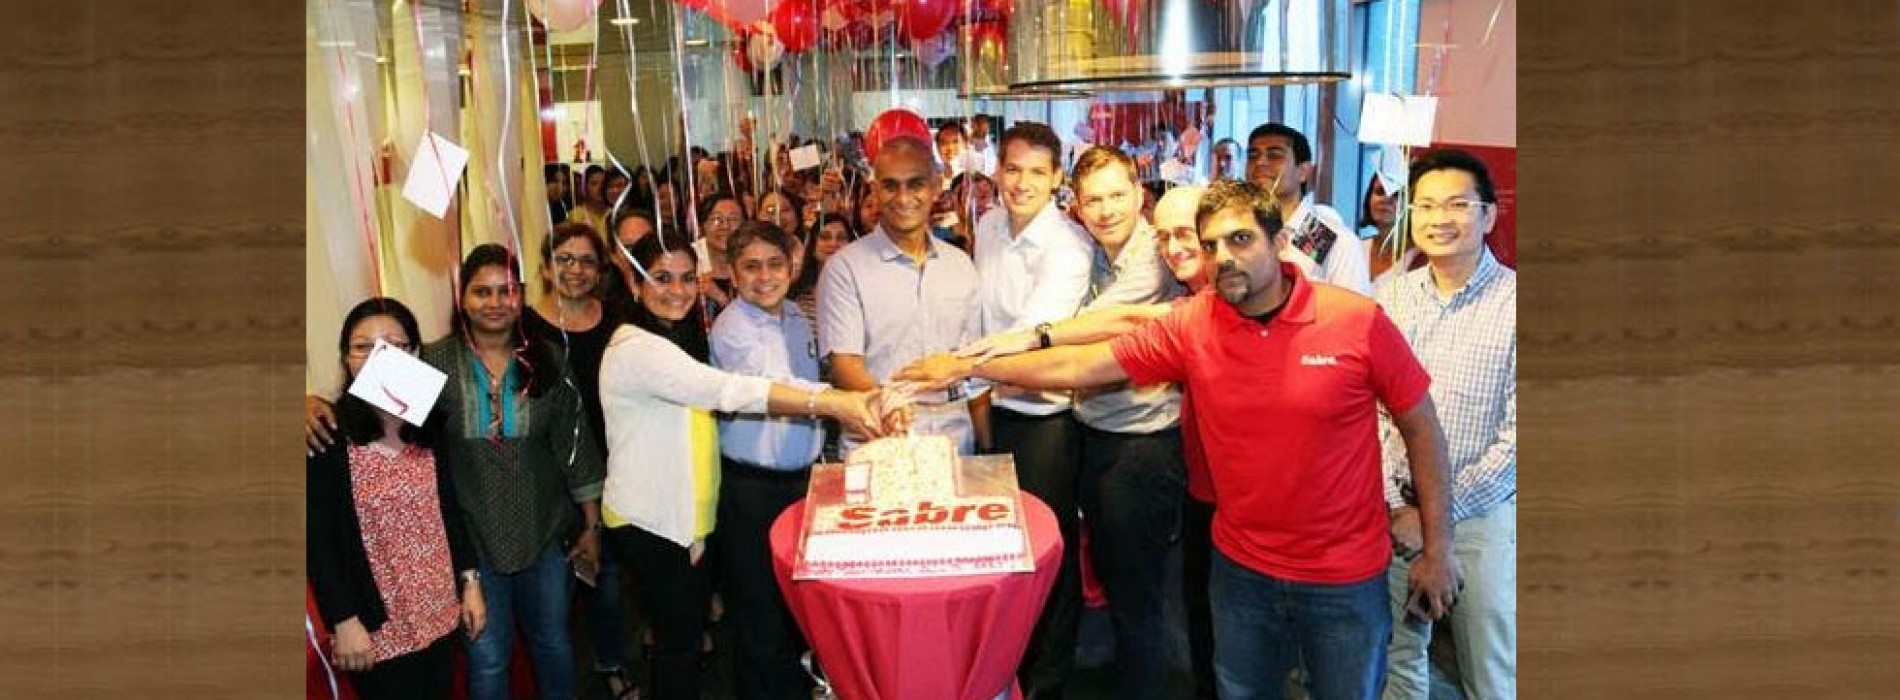 Sabre Travel Network celebrates a year of growth in Asia Pacific